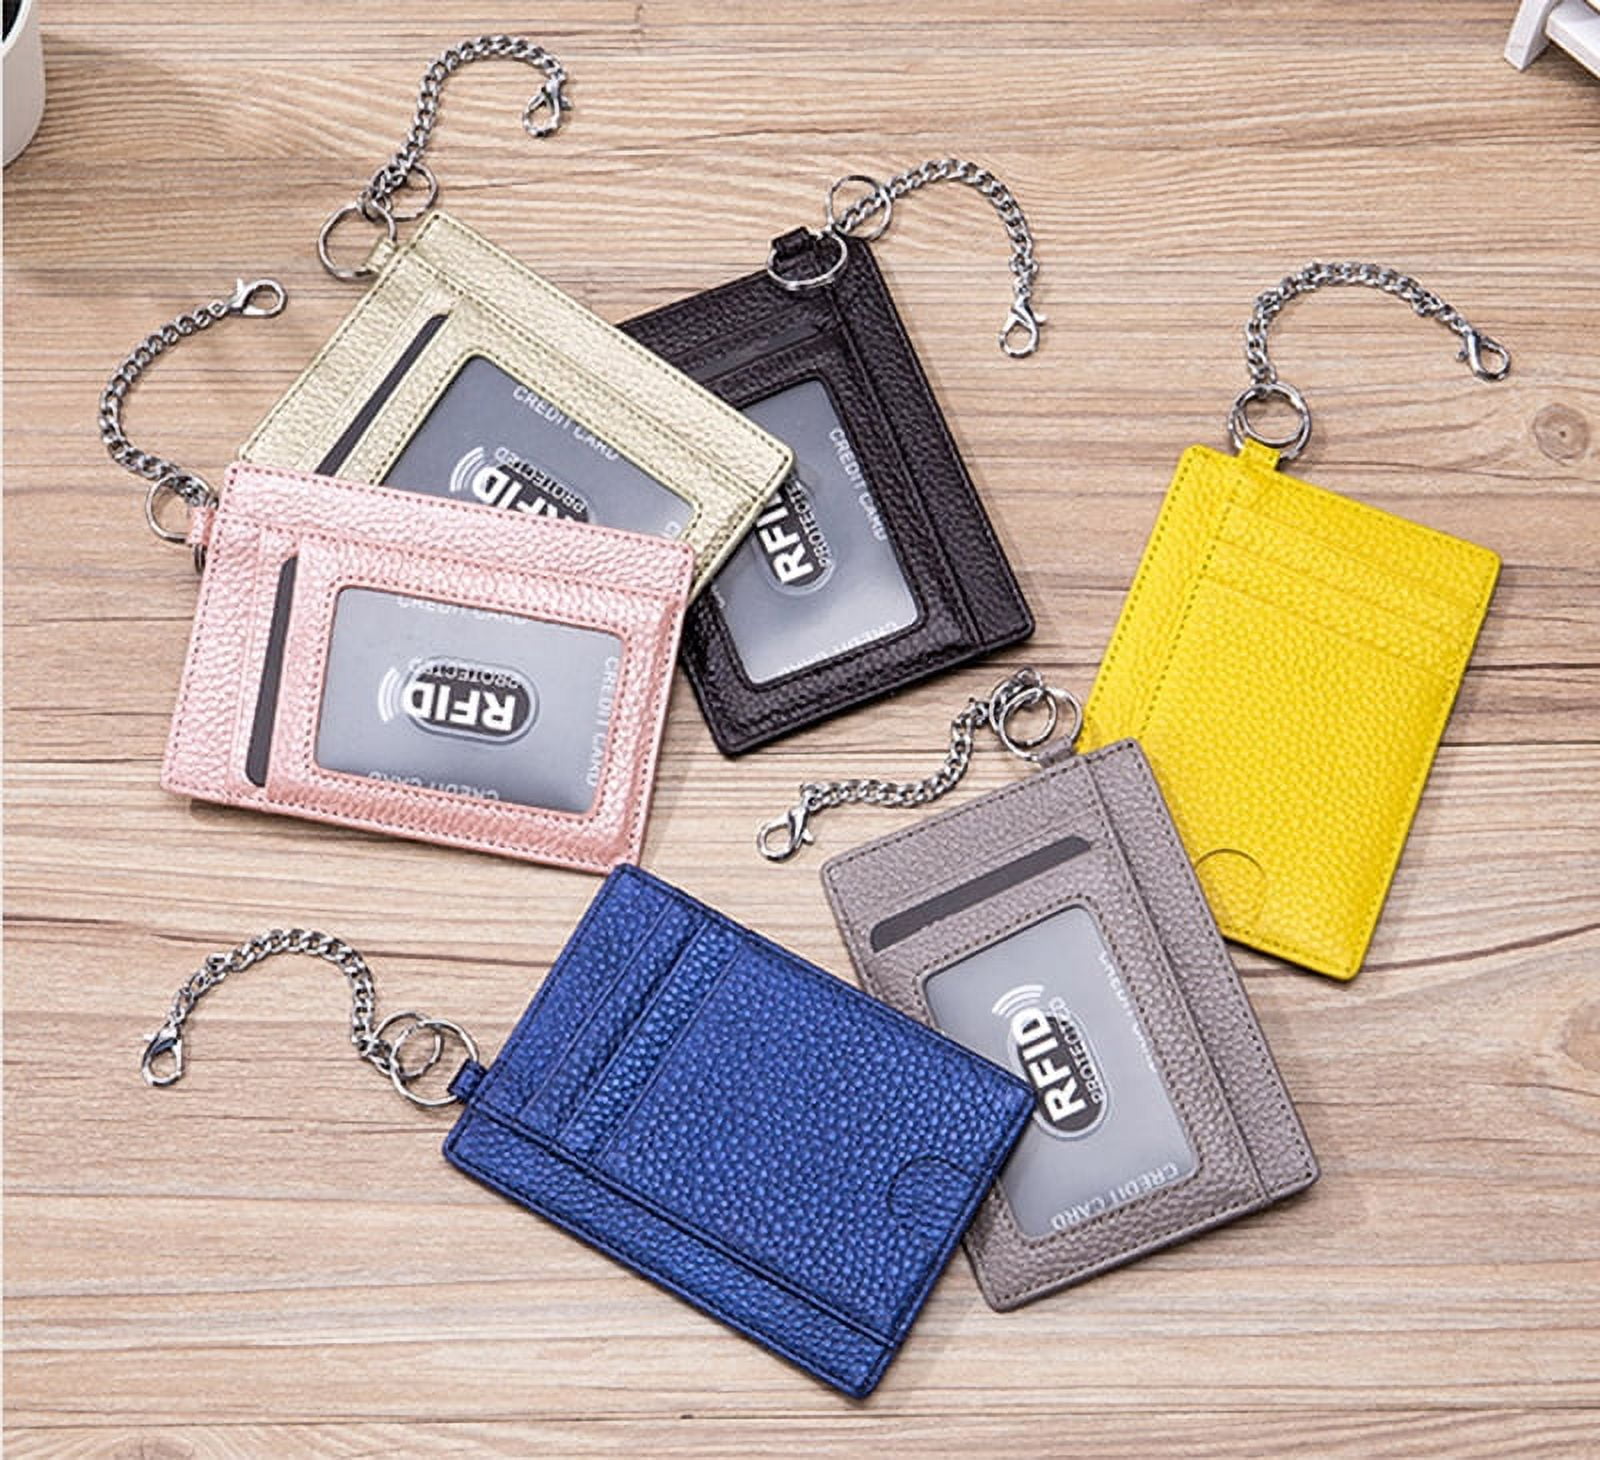 Super Thin Small Credit Card Holder Wallet Women's PU Leather Key Chain ID Card Case Slim Female